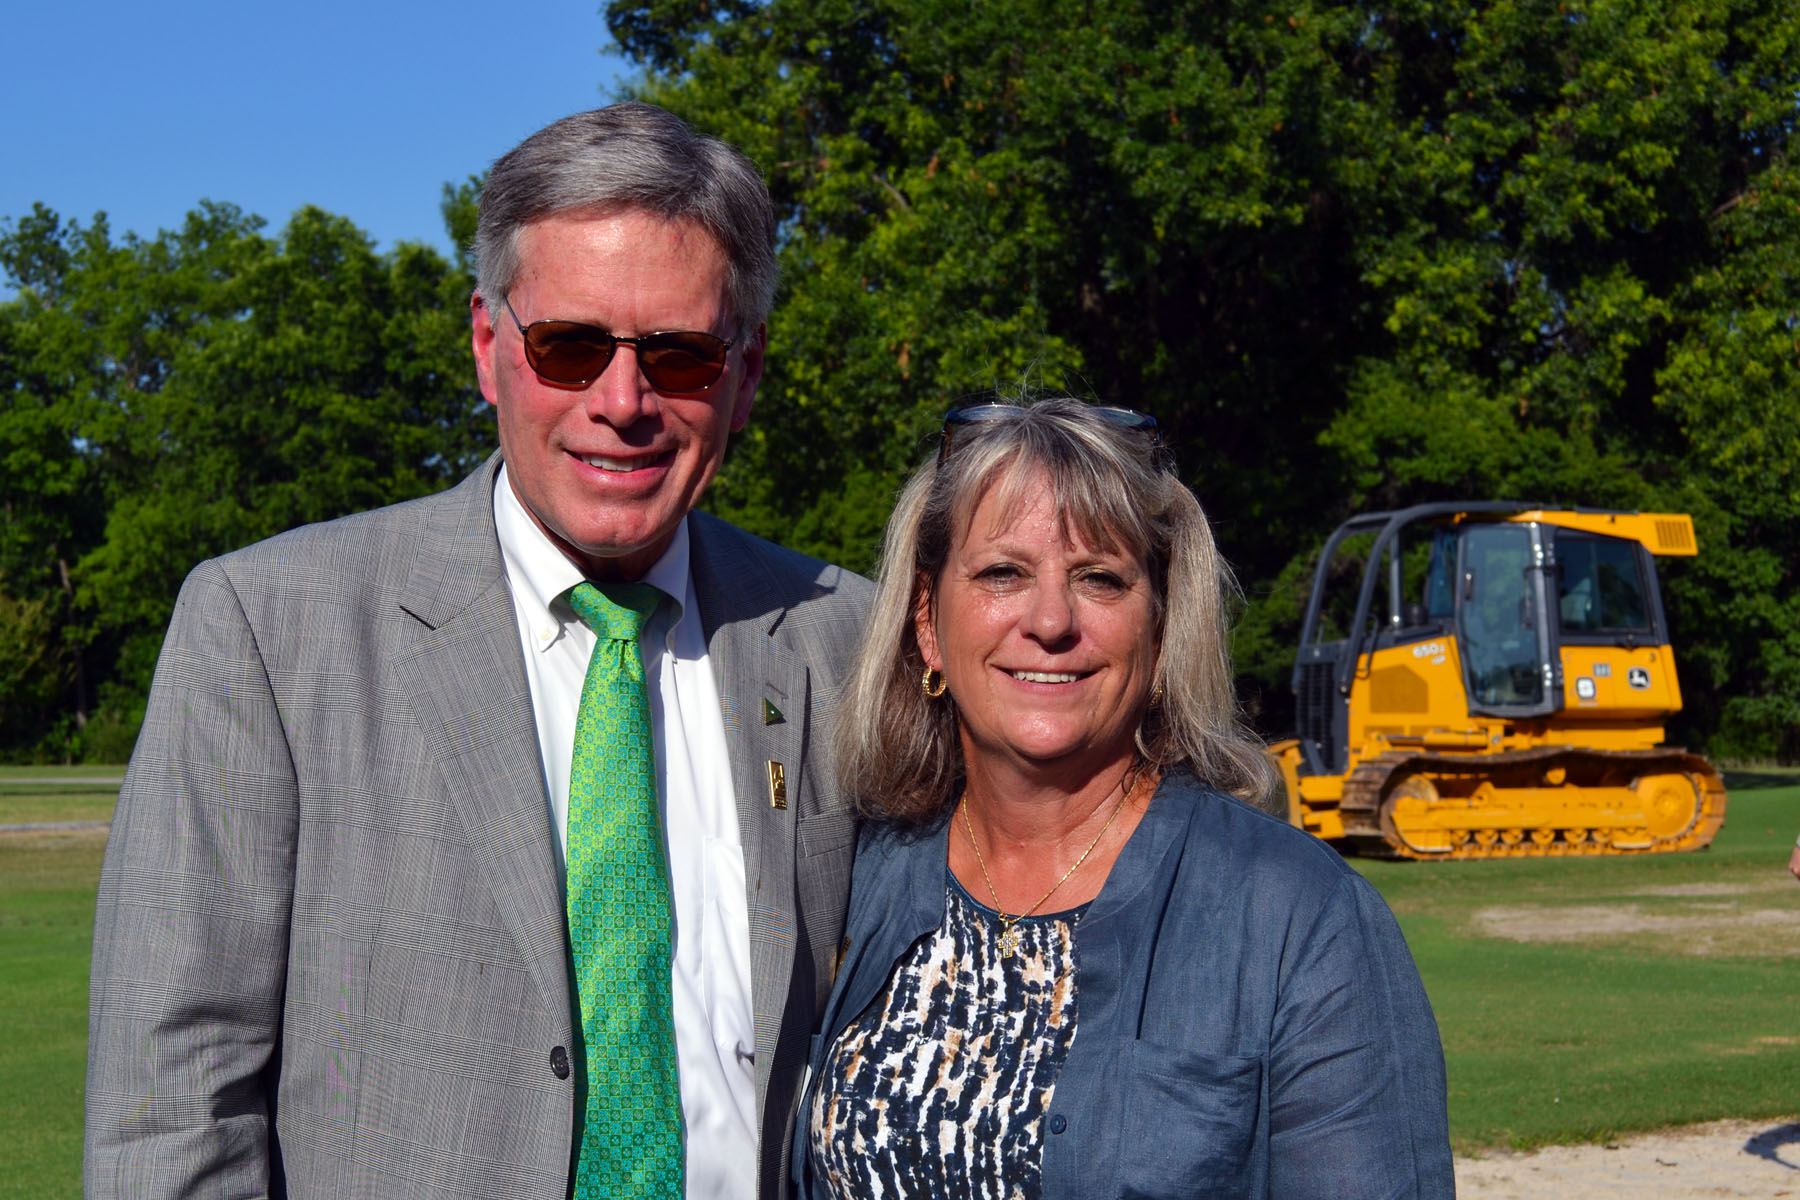 Photo: Delta State President William LaForge and Cleveland Music Foundation President Lucy Janoush break ground for GRAMMY Museum at Delta State.